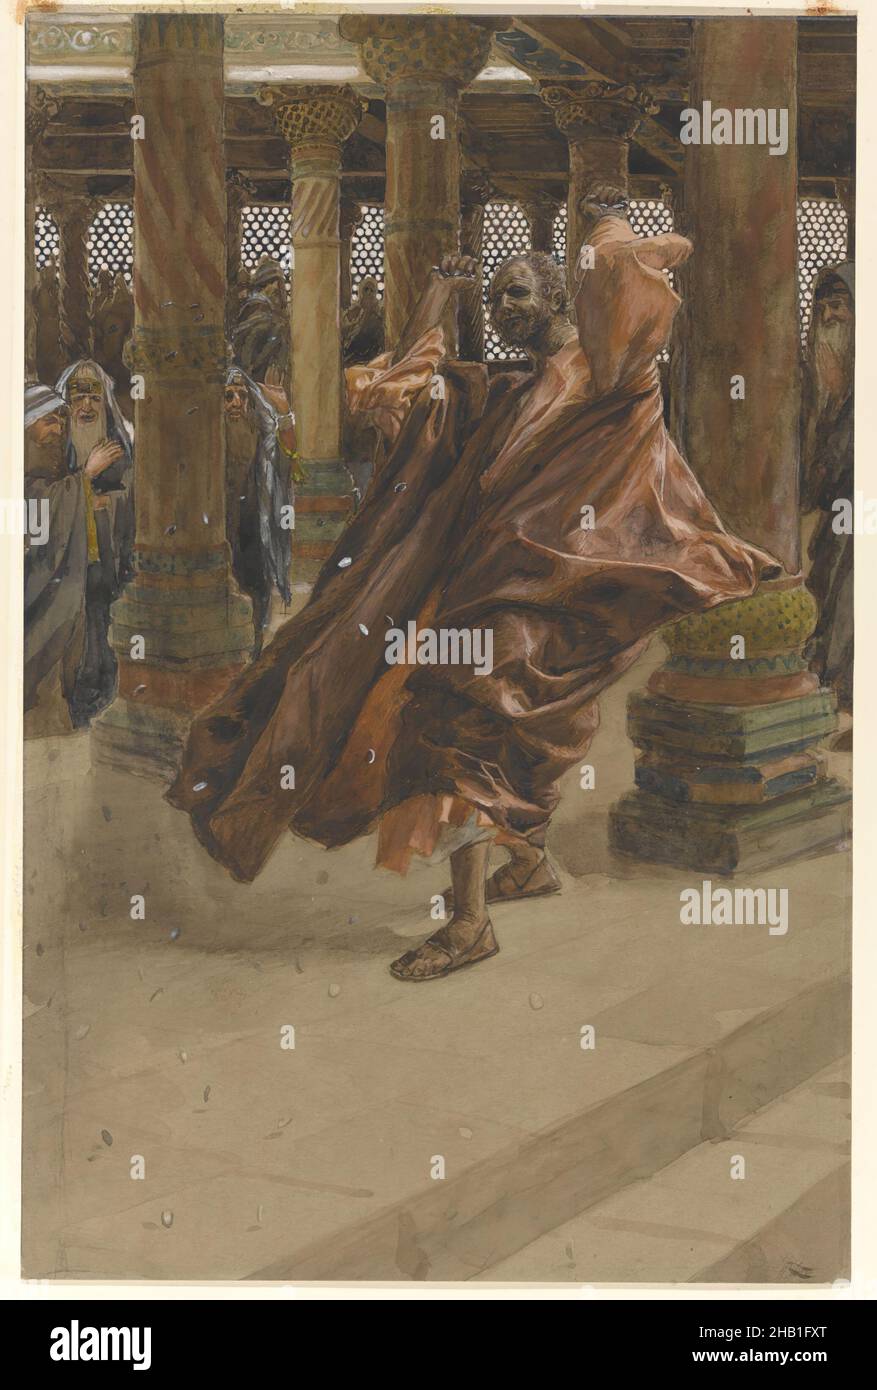 Judas Returns the Money, Judas rend l'argent, The Life of Our Lord Jesus Christ, La Vie de Notre-Seigneur Jésus-Christ, James Tissot, French, 1836-1902, Opaque watercolor over graphite on gray wove paper, France, 1886-1894, Image: 11 13/16 x 7 3/4 in., 30 x 19.7 cm, action, beard, Christianity, coin, coins, column, columns, dynamic, dynamism, French, French artist, guilt, Jesus Christ, Judas, male figure, Matthew 27:3-8, regret, religious, religious art, repent, robe, robes, sorrow, temple, Tissot, traditor Stock Photo